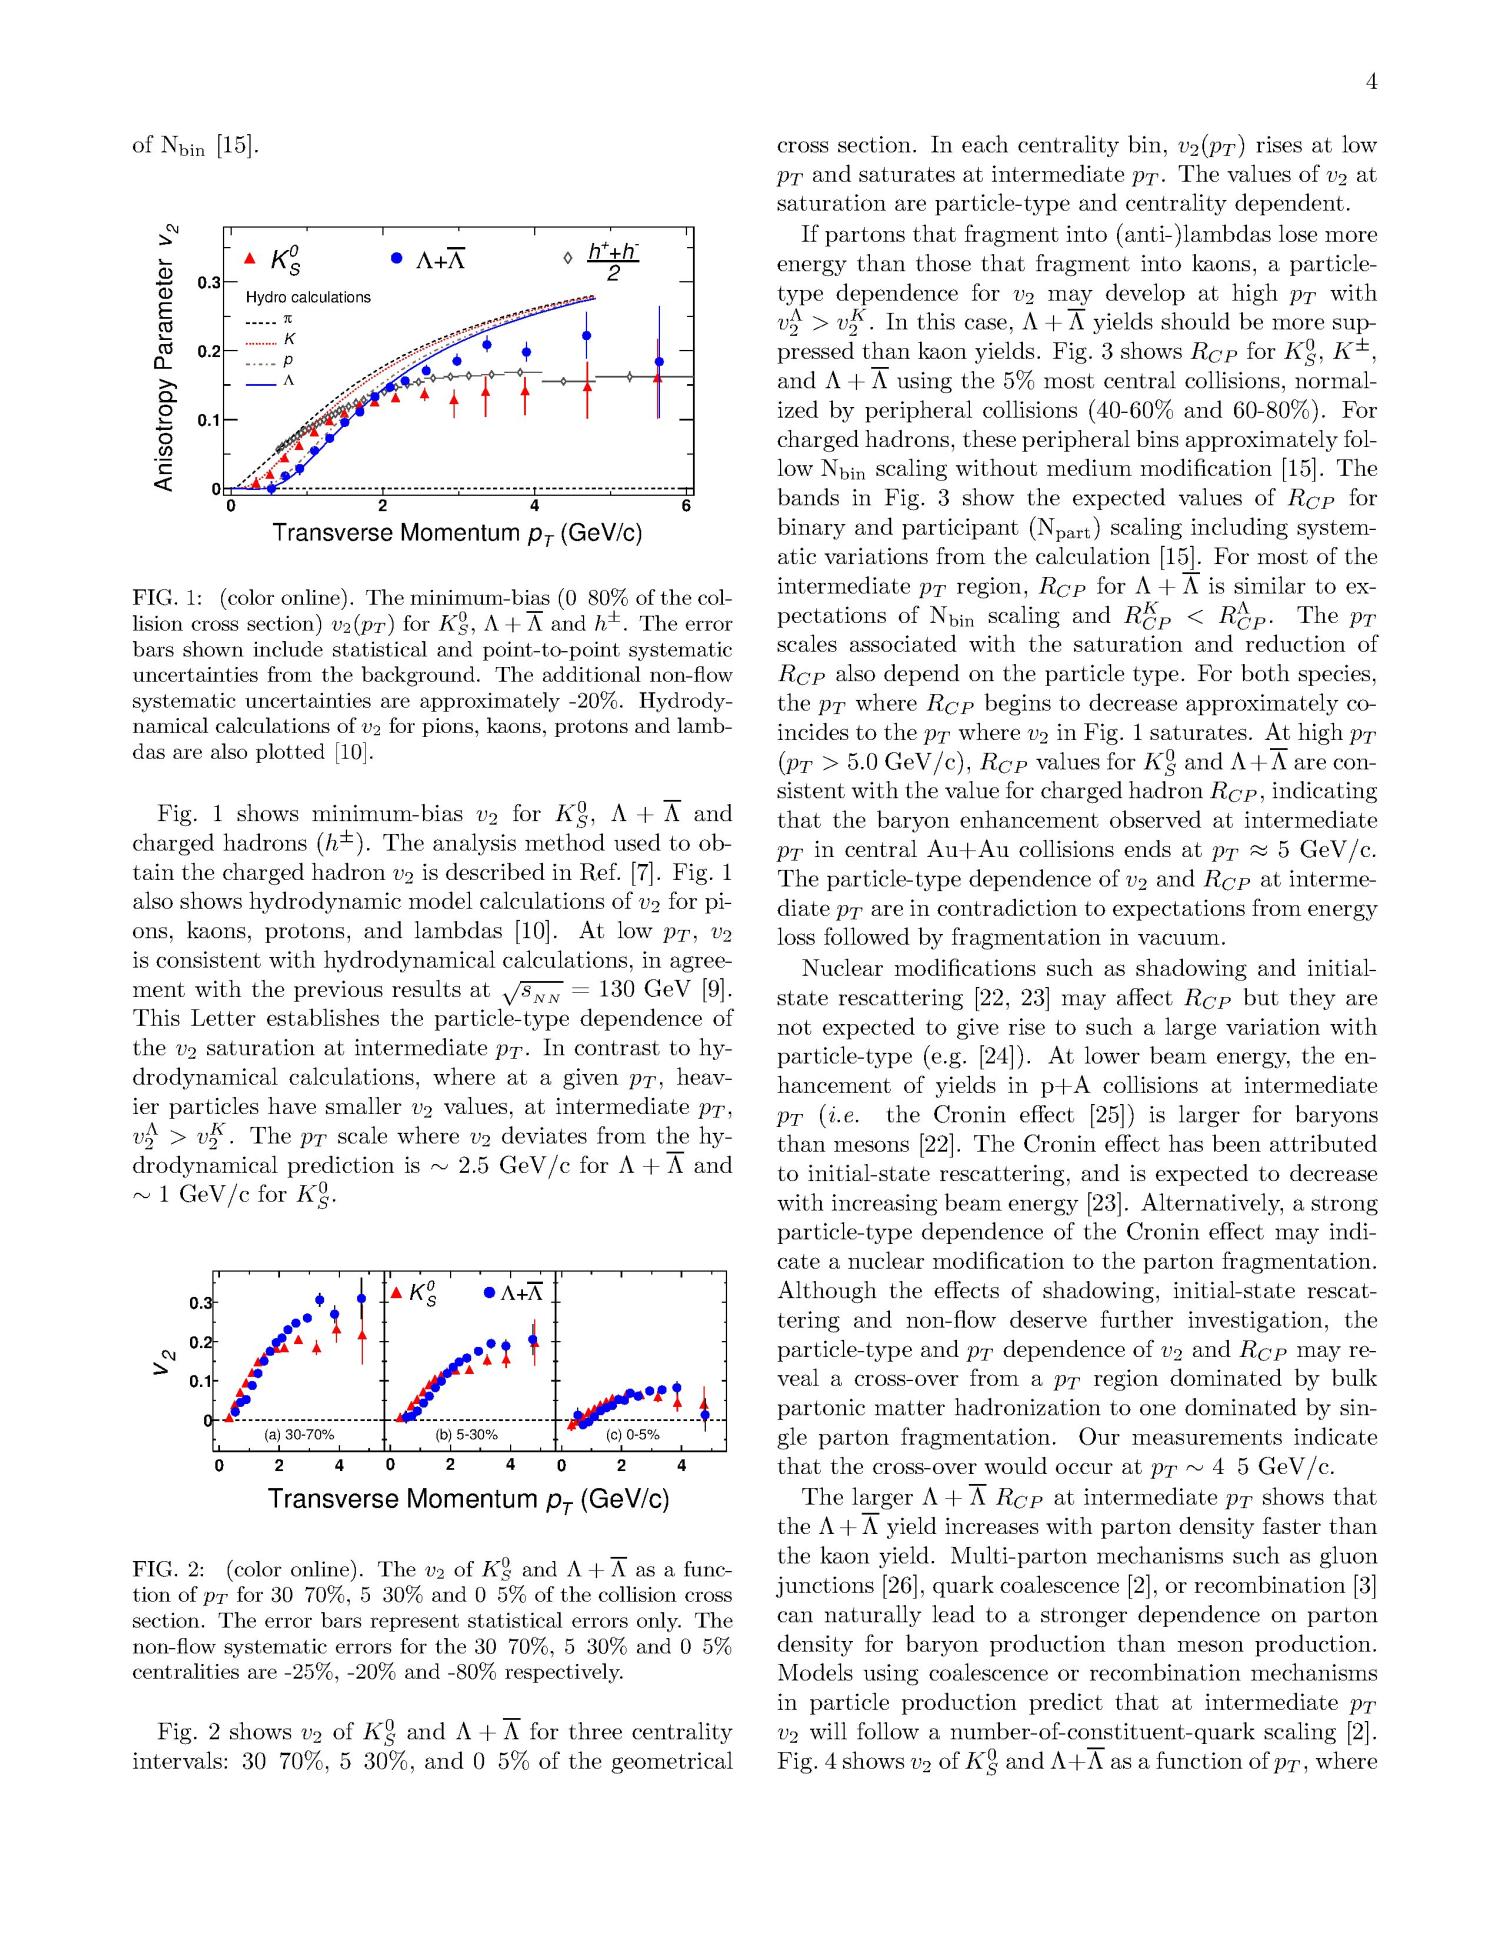 Particle-type dependence of azimuthal anisotropy and nuclearmodification of particle production in Au+Au collisions at sNN = 200GeV
                                                
                                                    [Sequence #]: 4 of 6
                                                